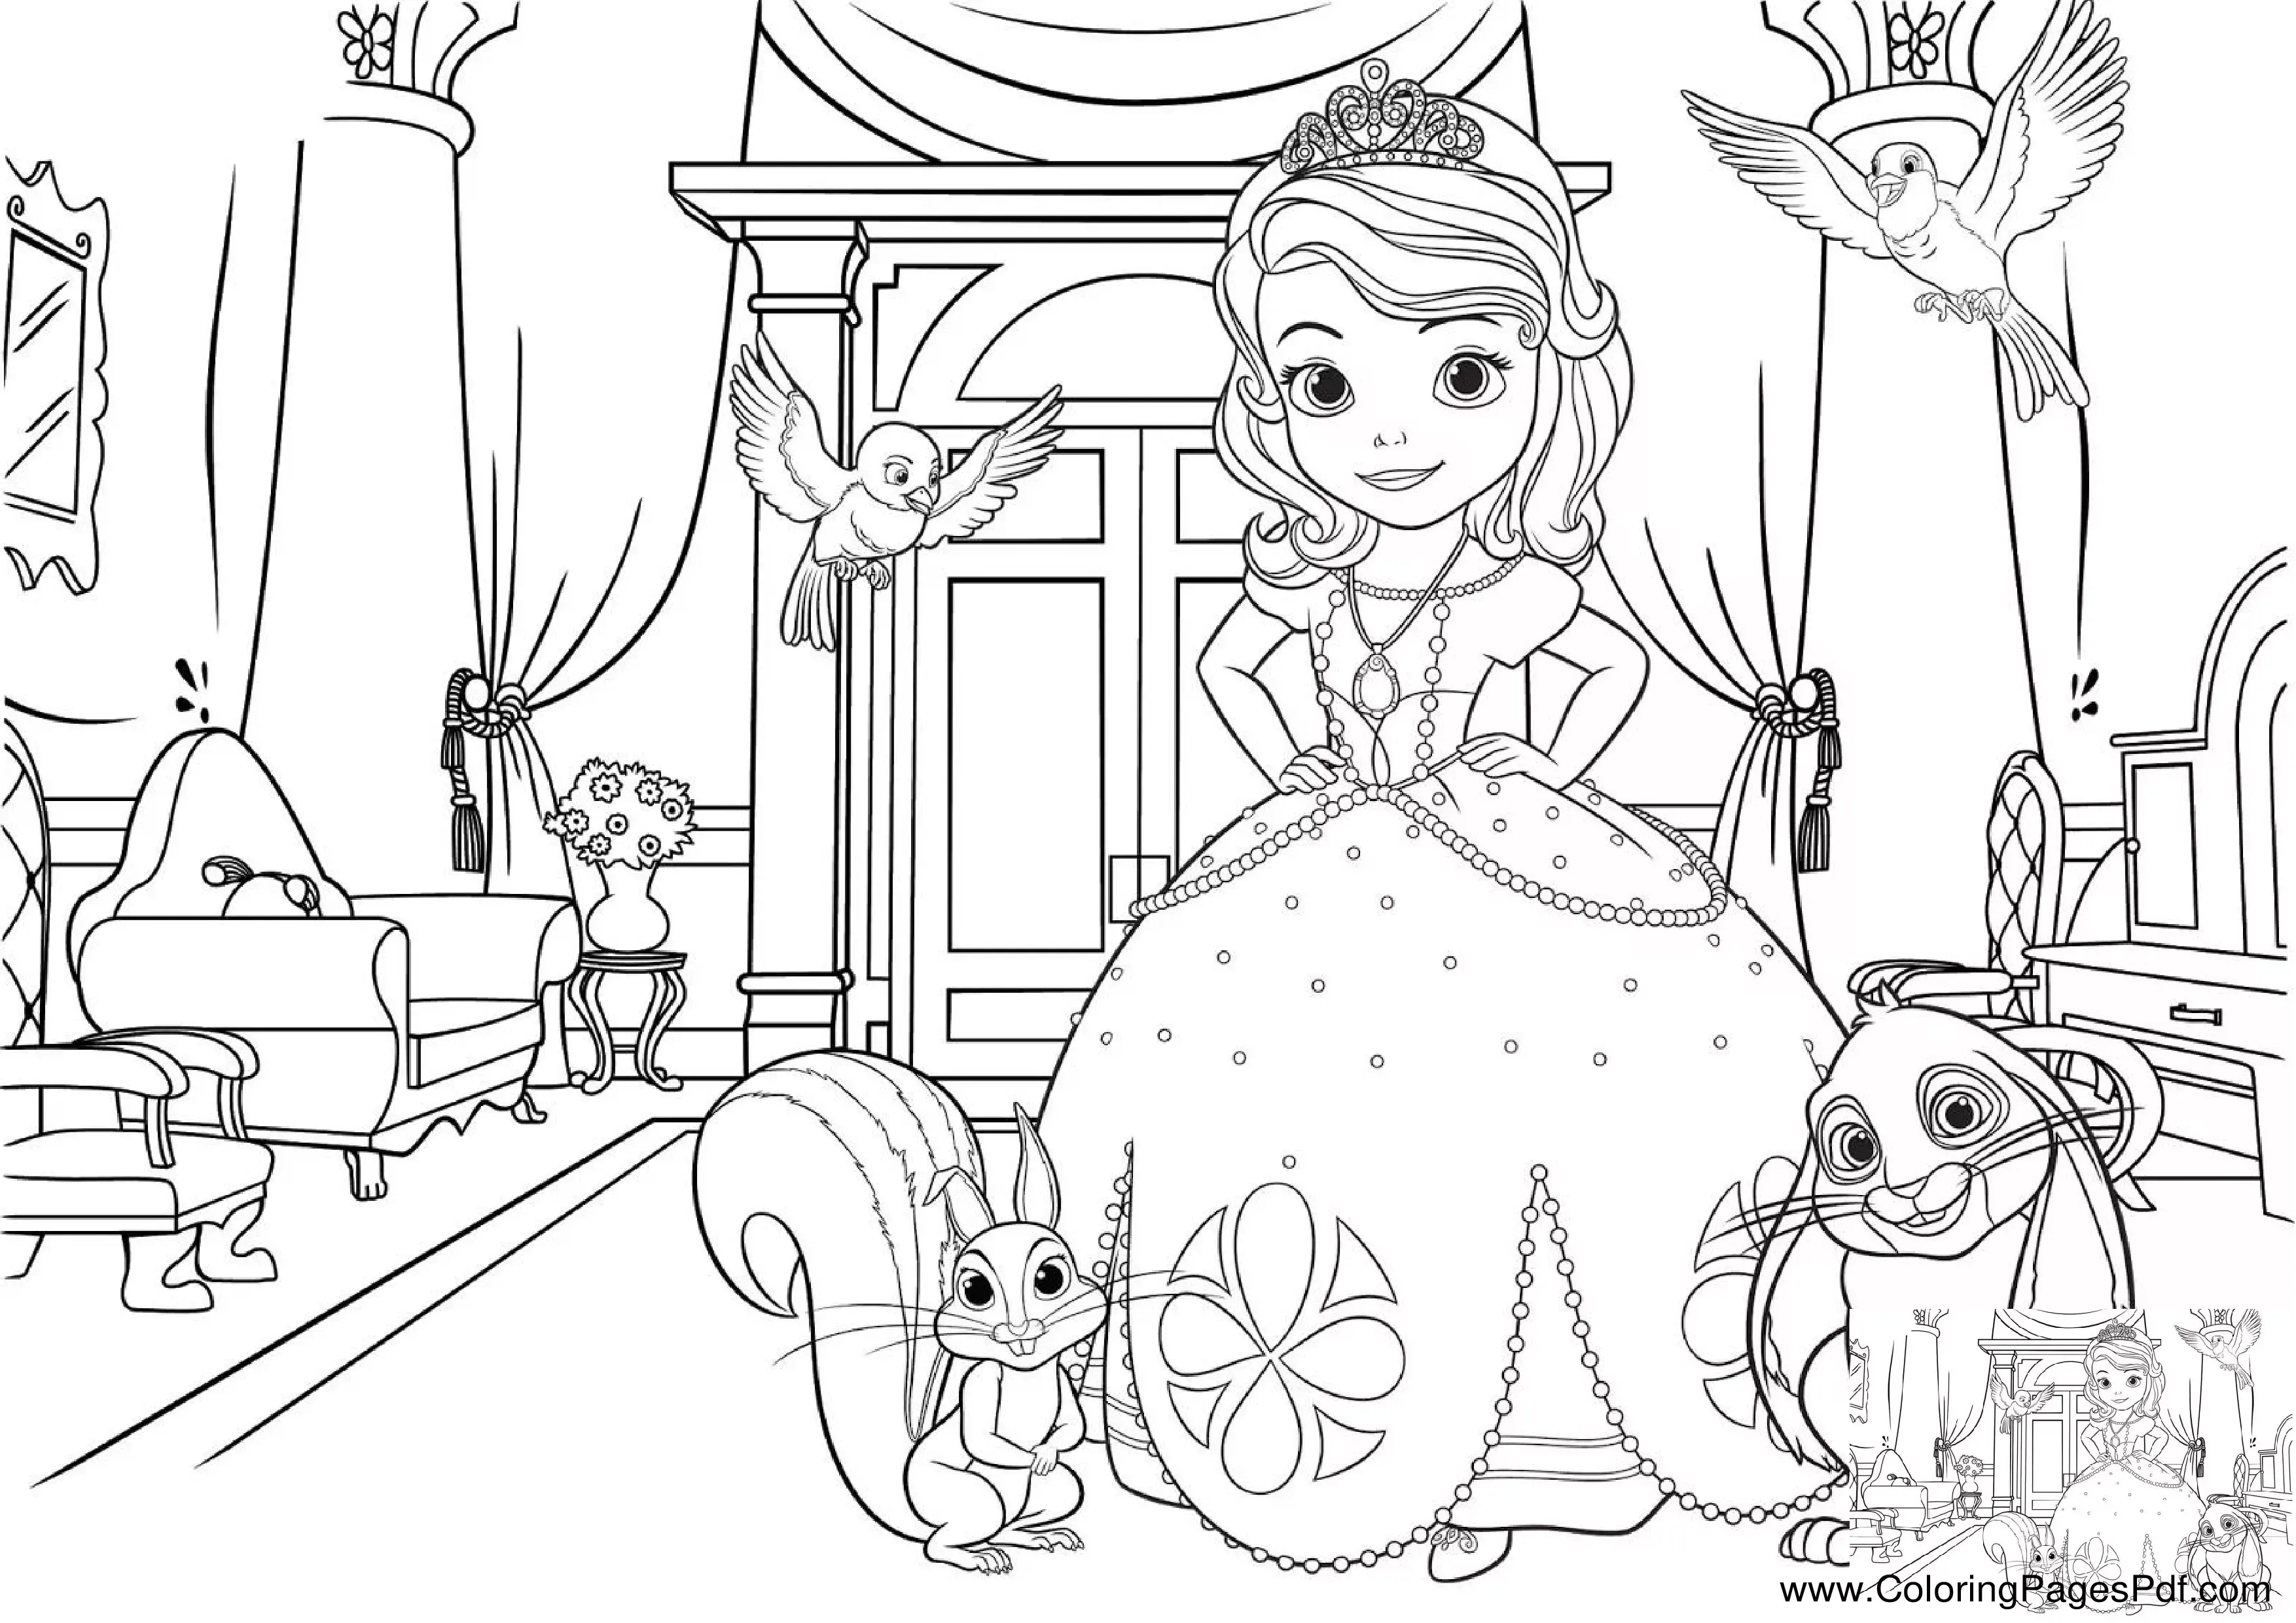 Princess coloring pages for girls